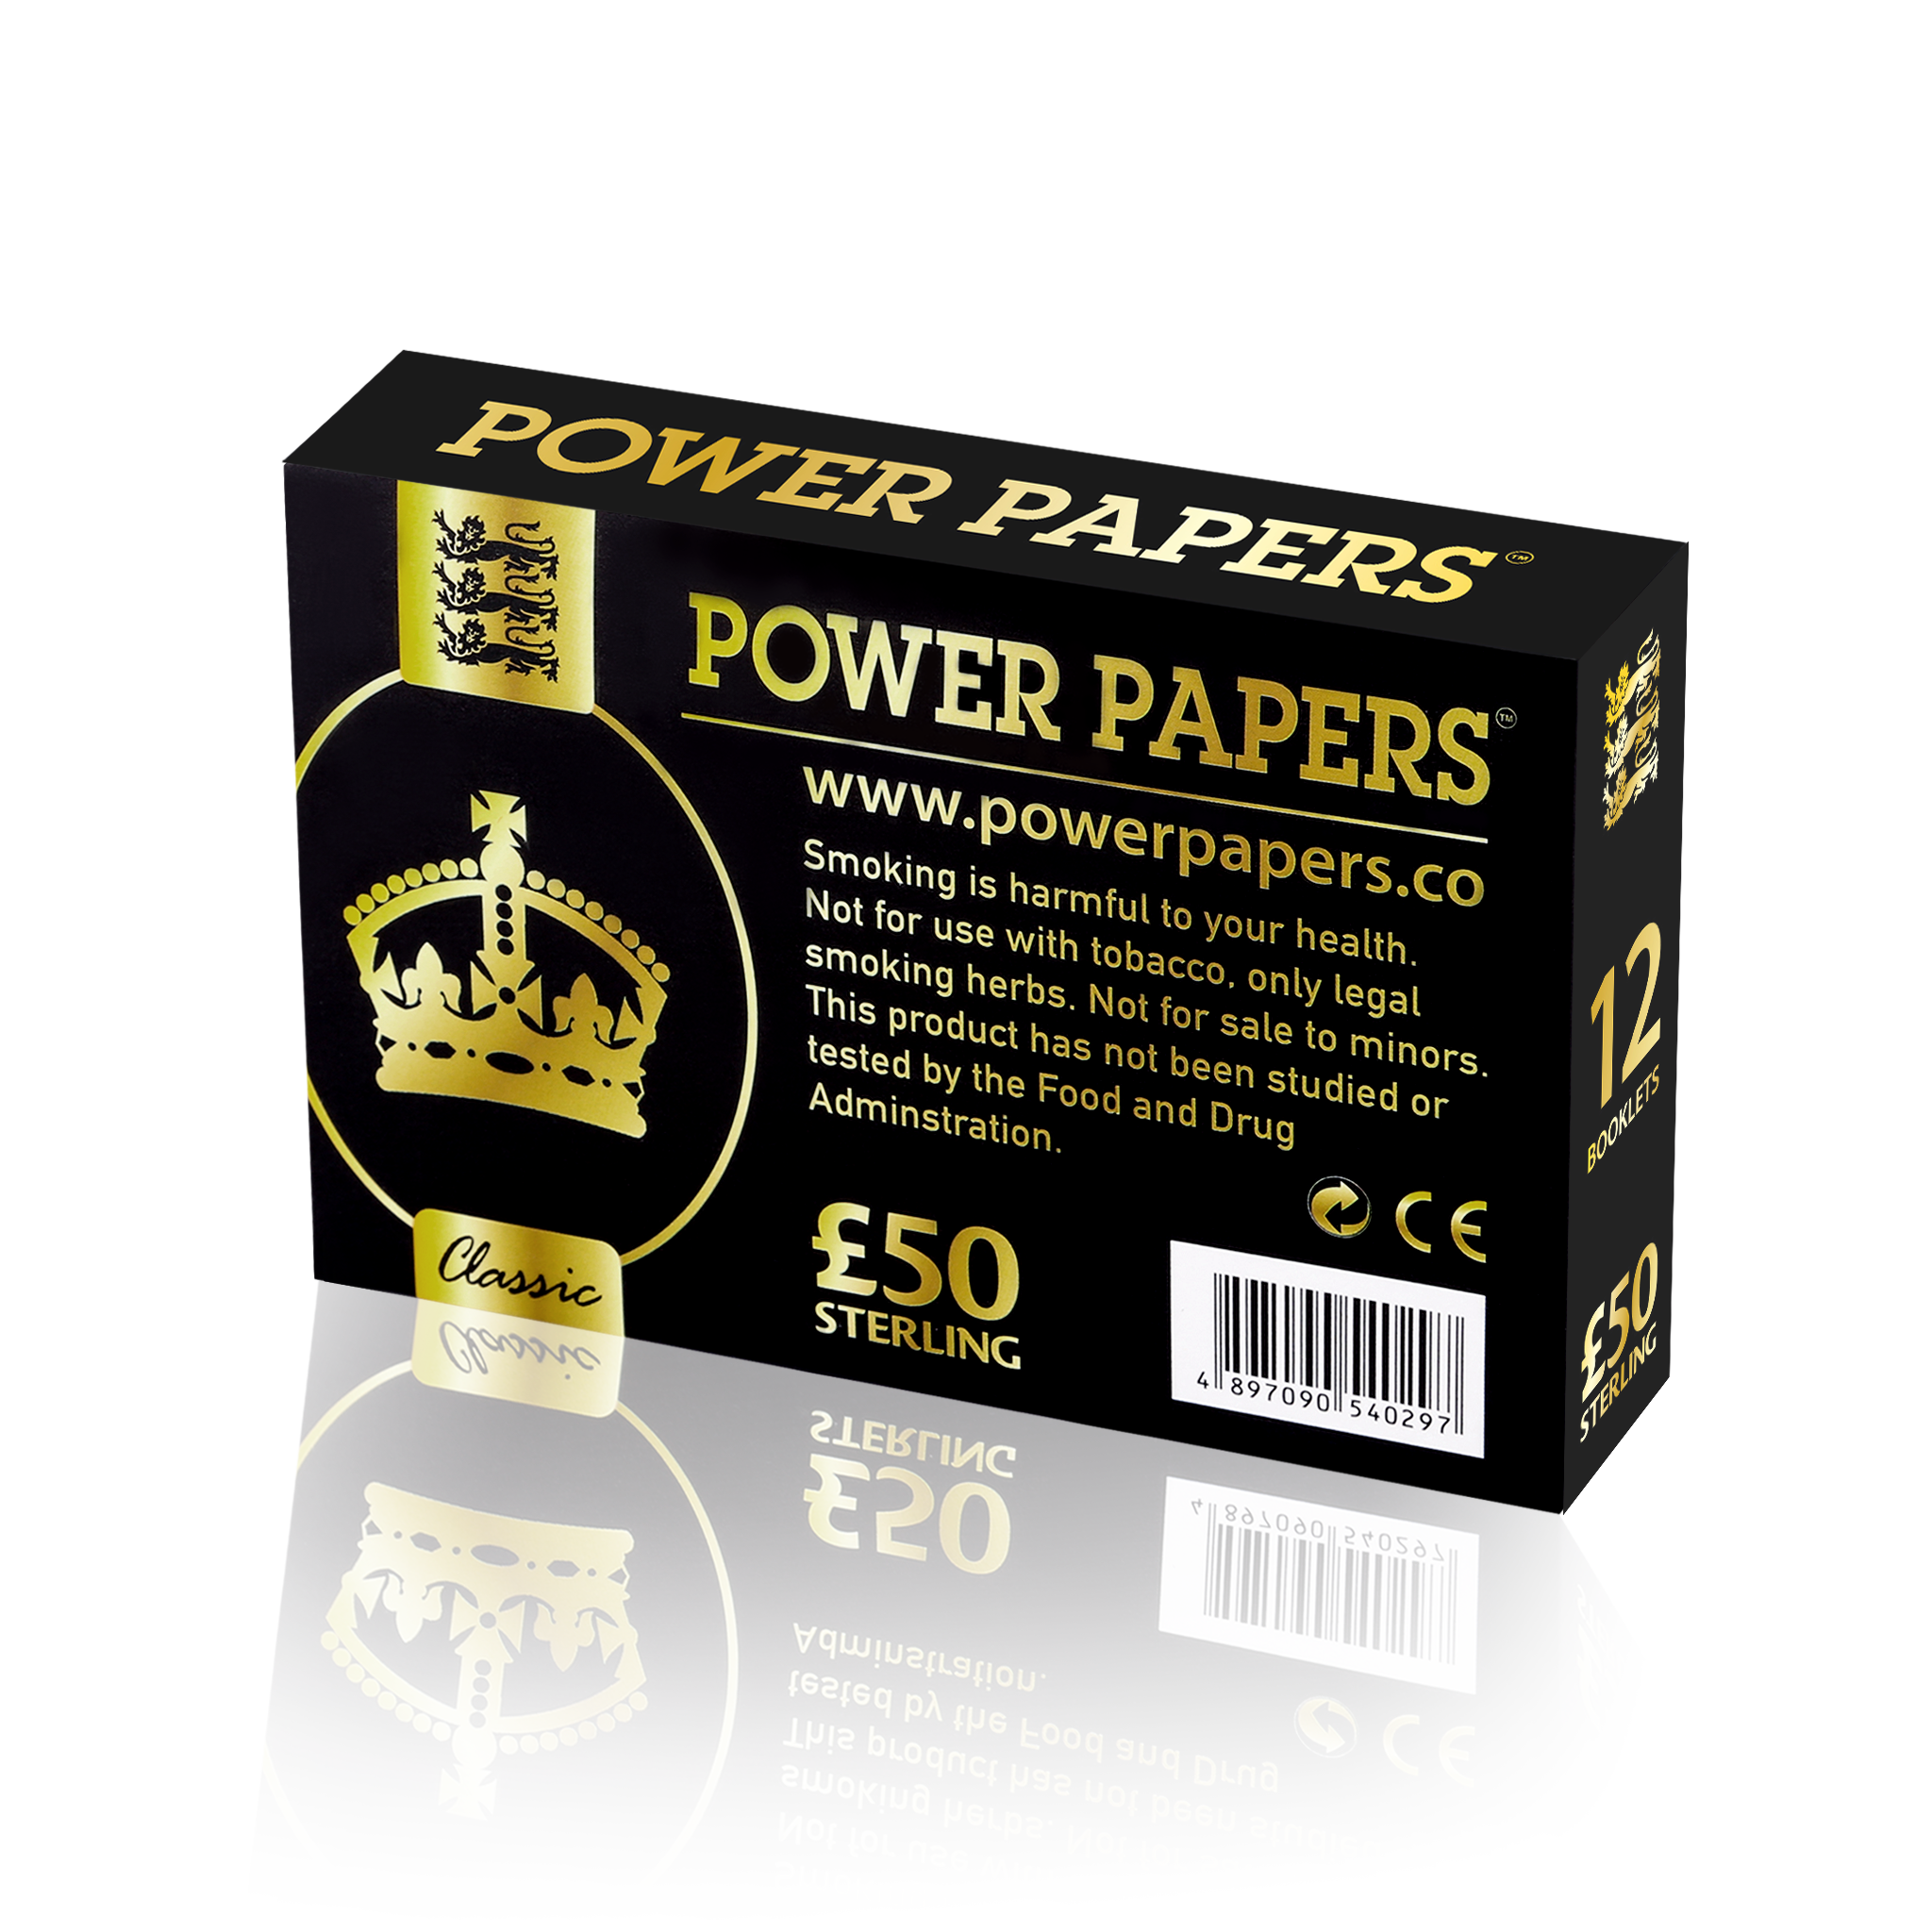 POWER PAPERS™ GBP£50 Rolling Paper